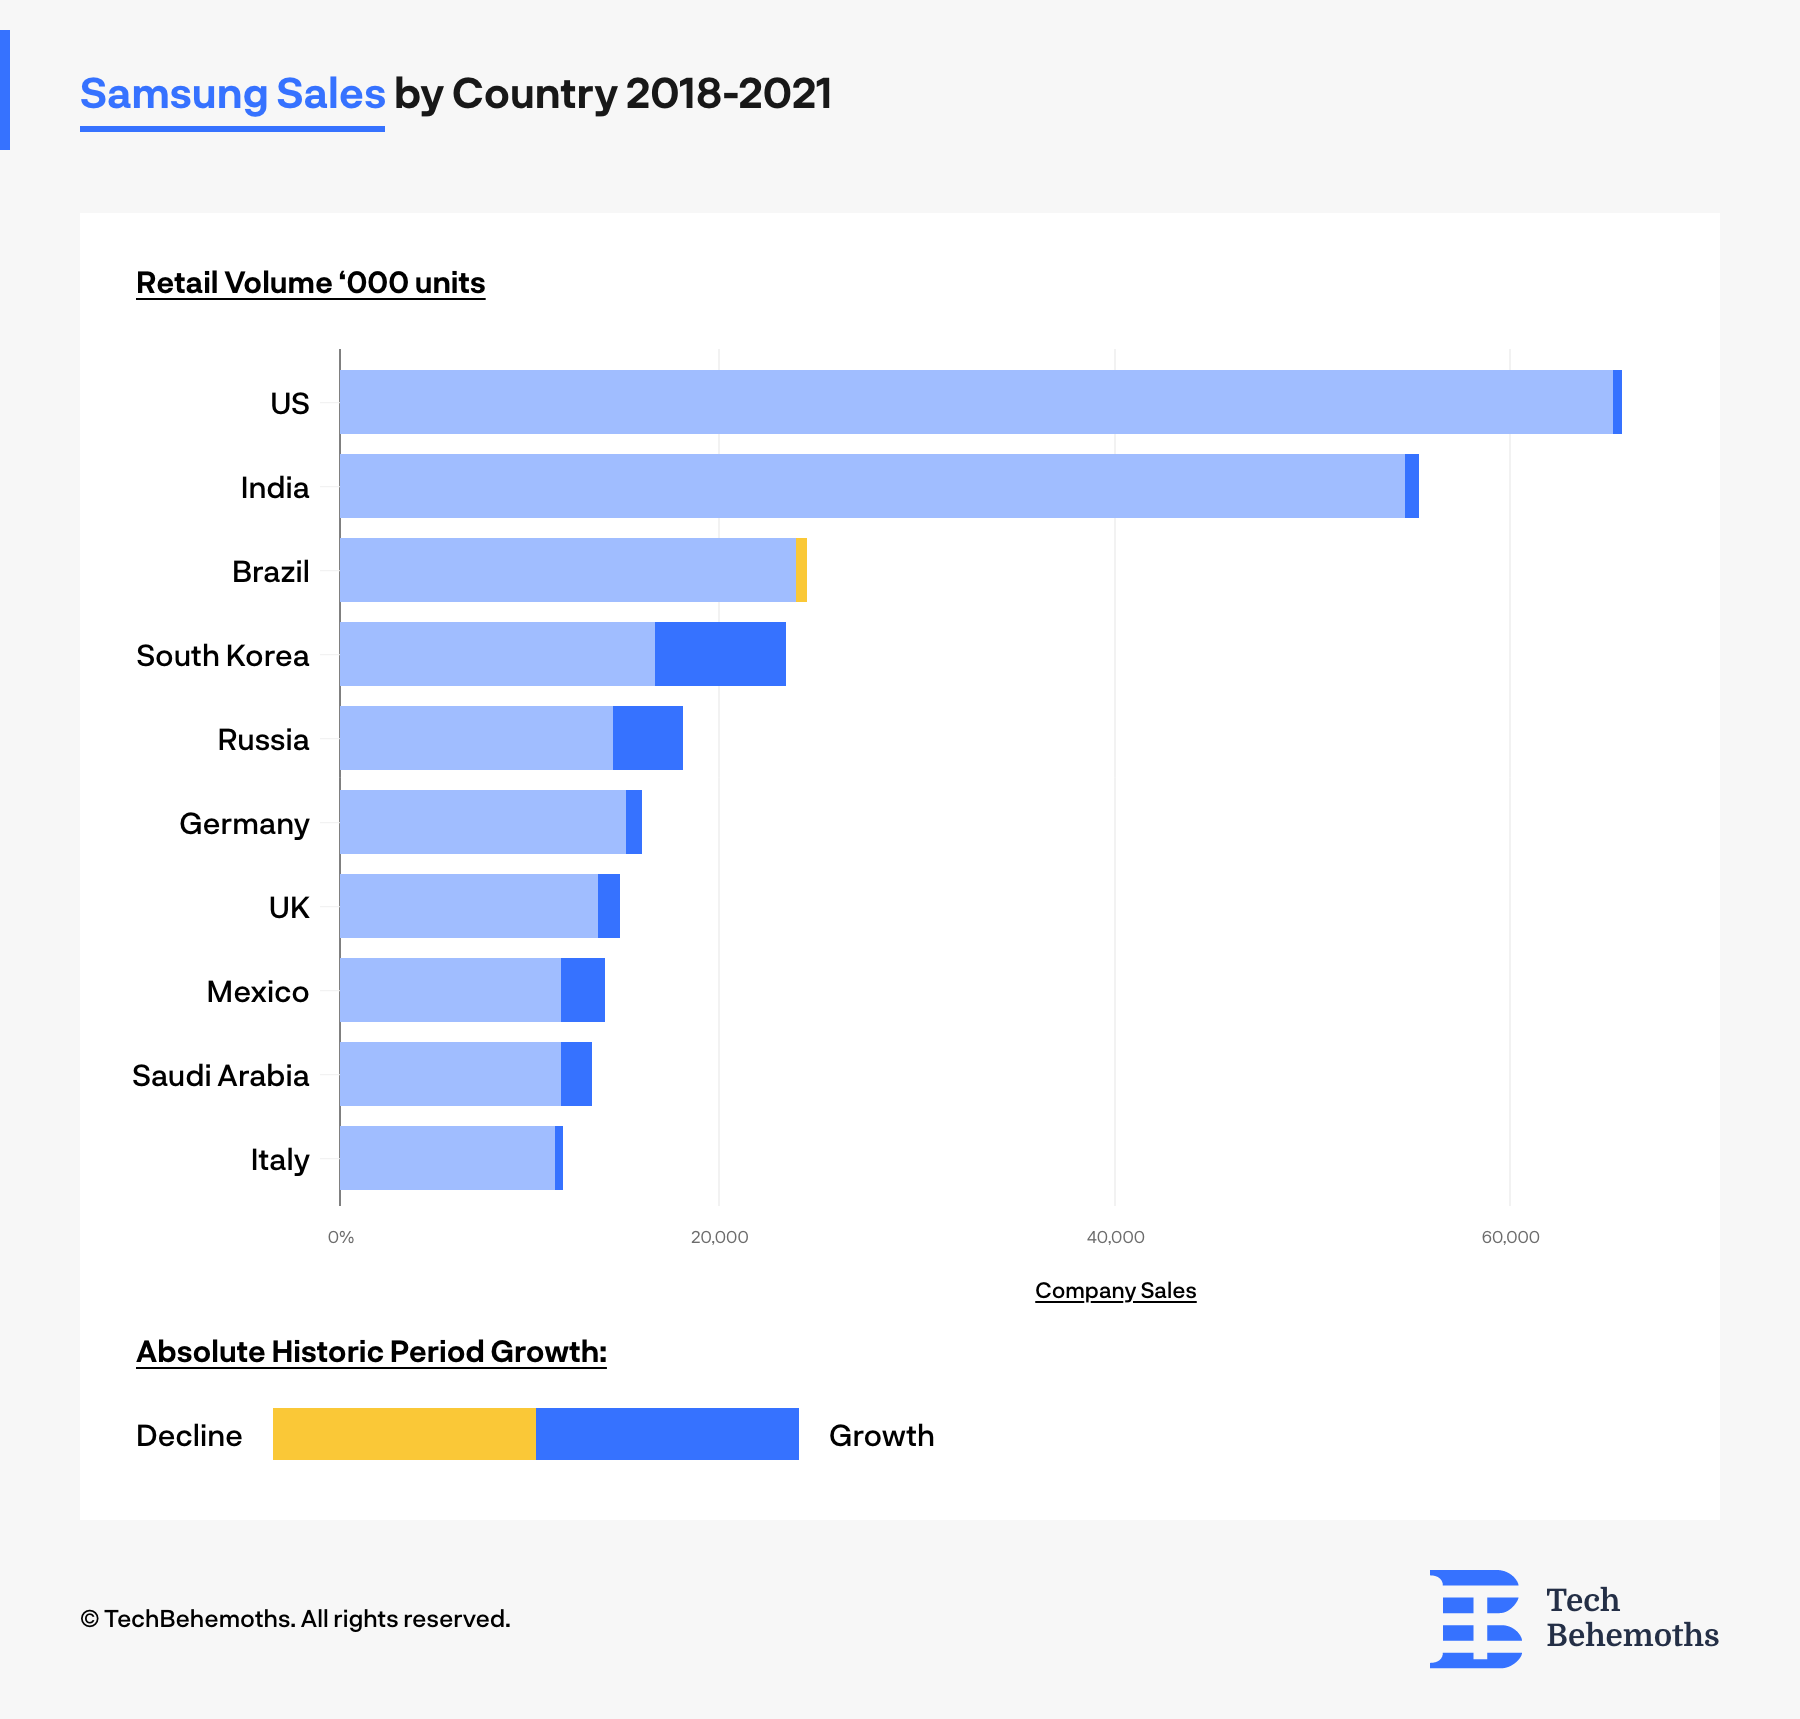 Samsung Sales by Country 2018-2021